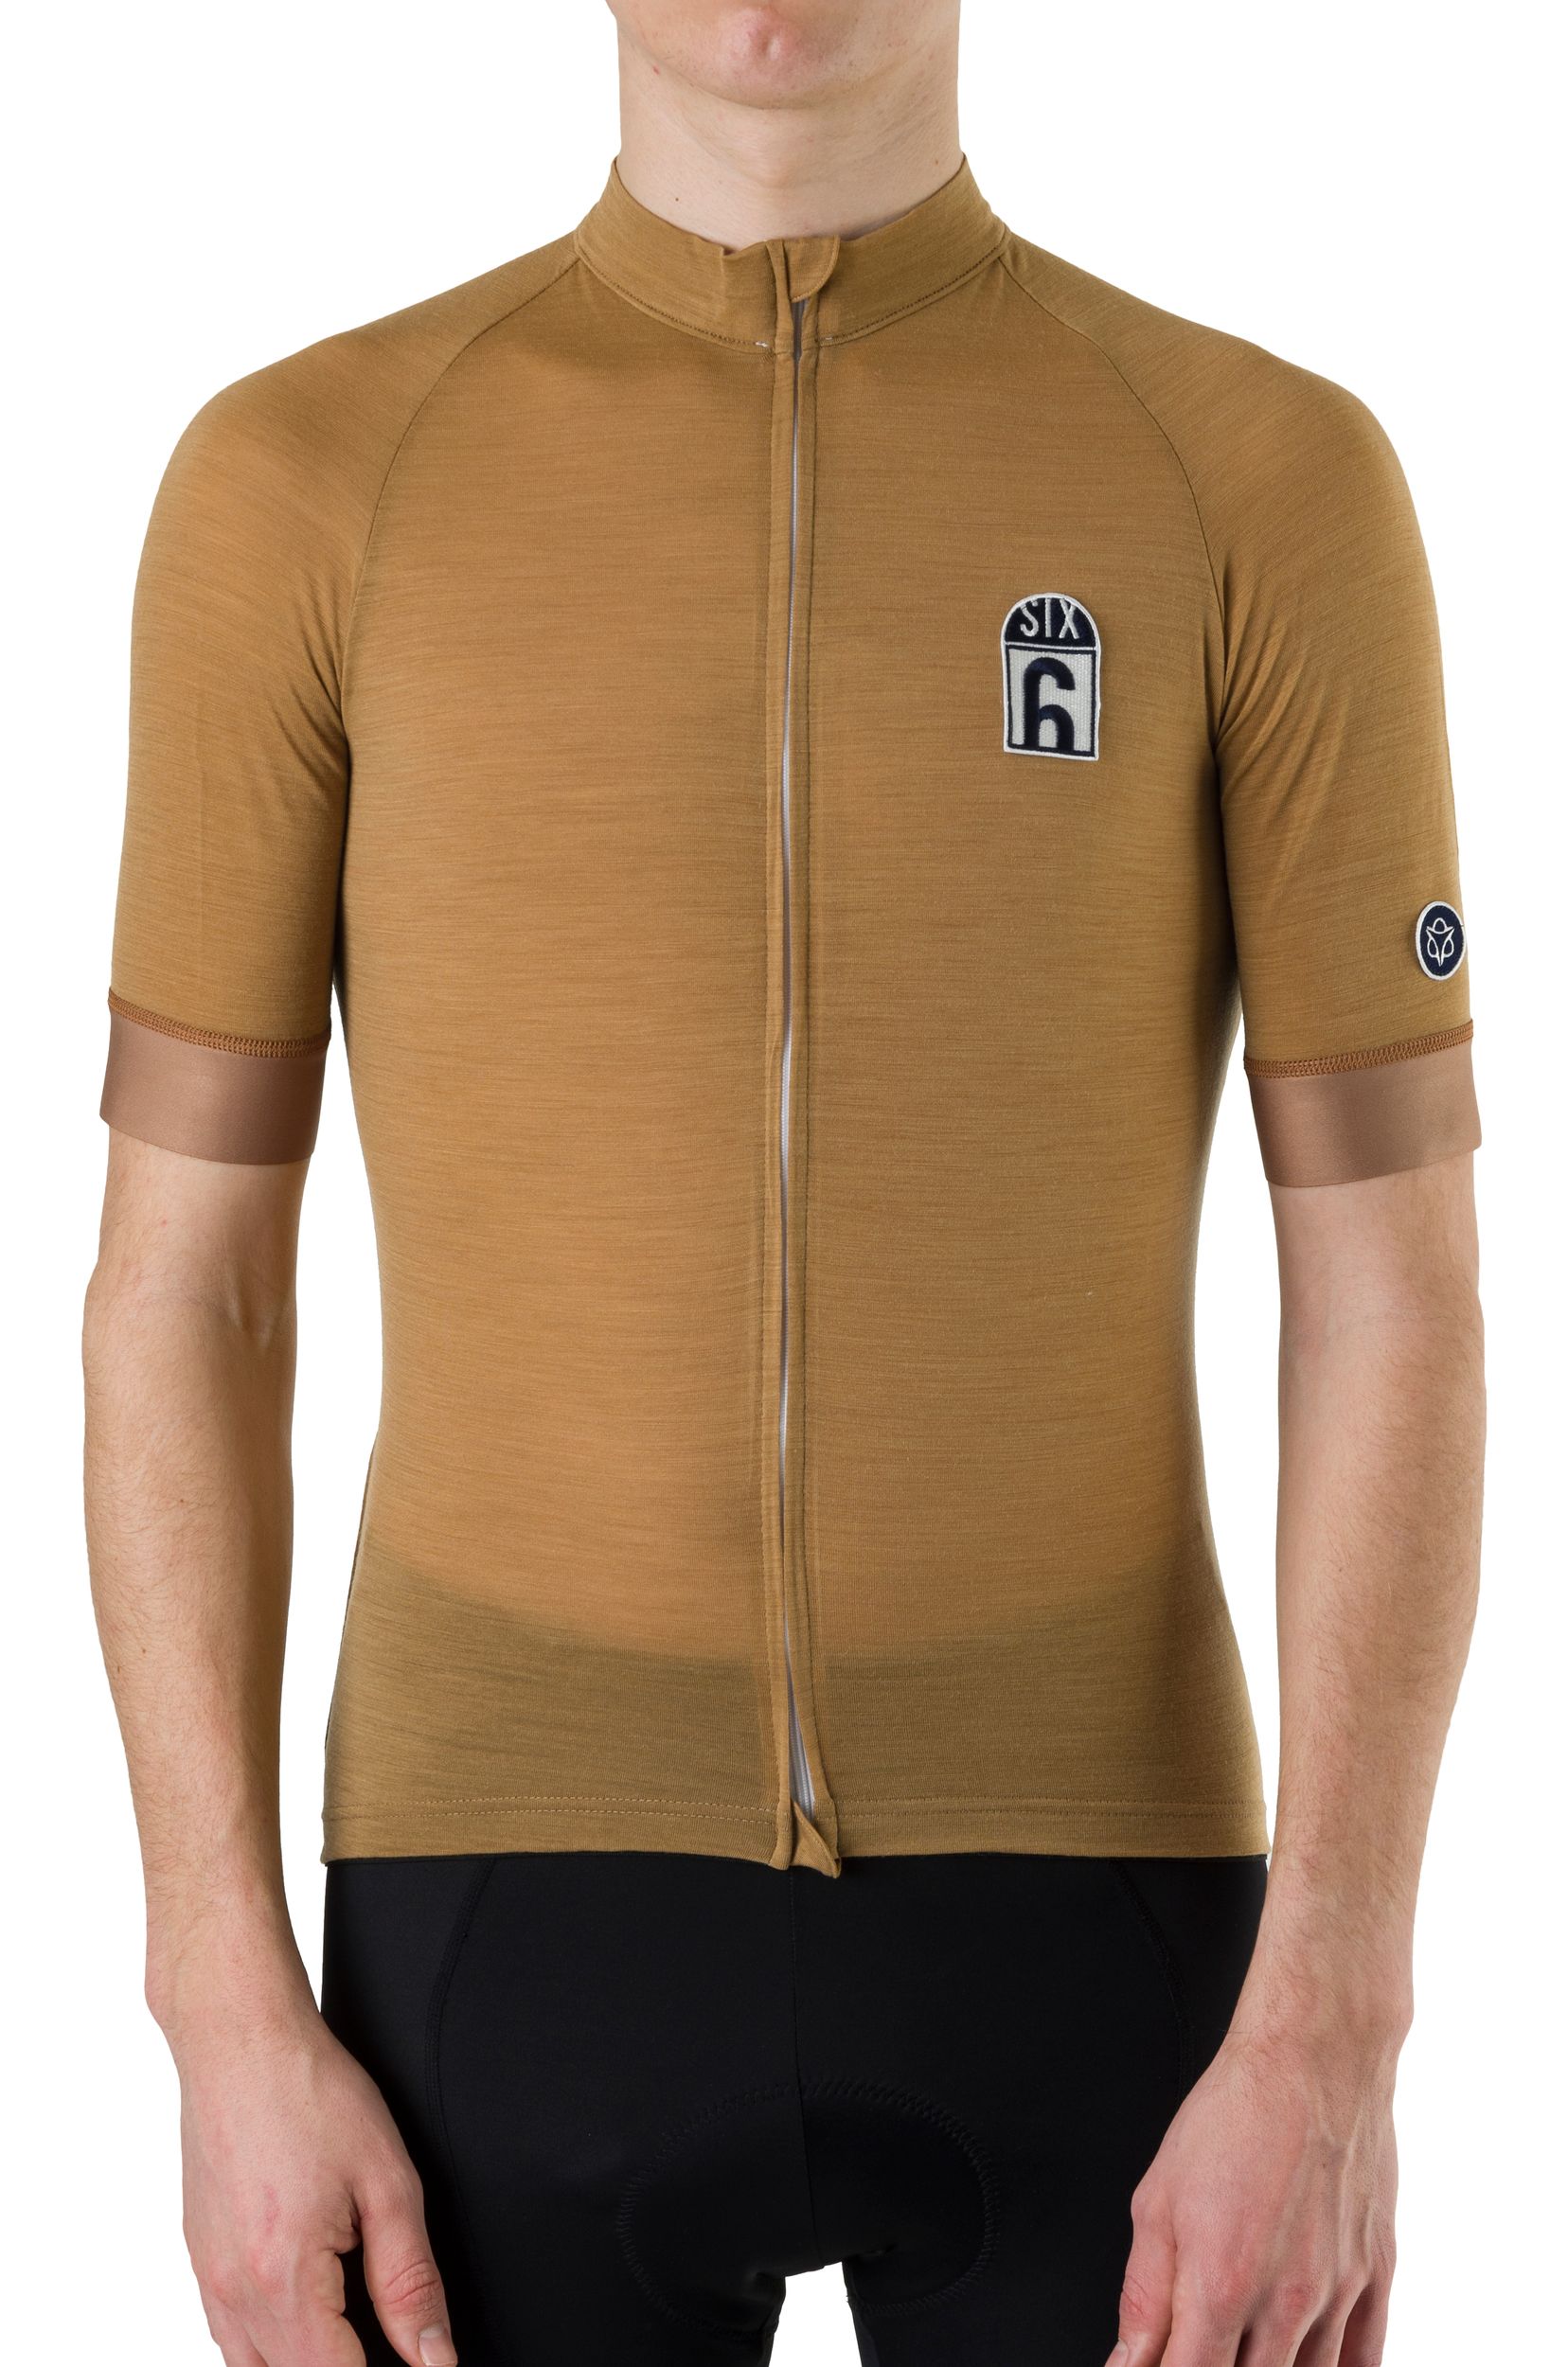 Solid Merino Jersey SS SIX6 Men fit example